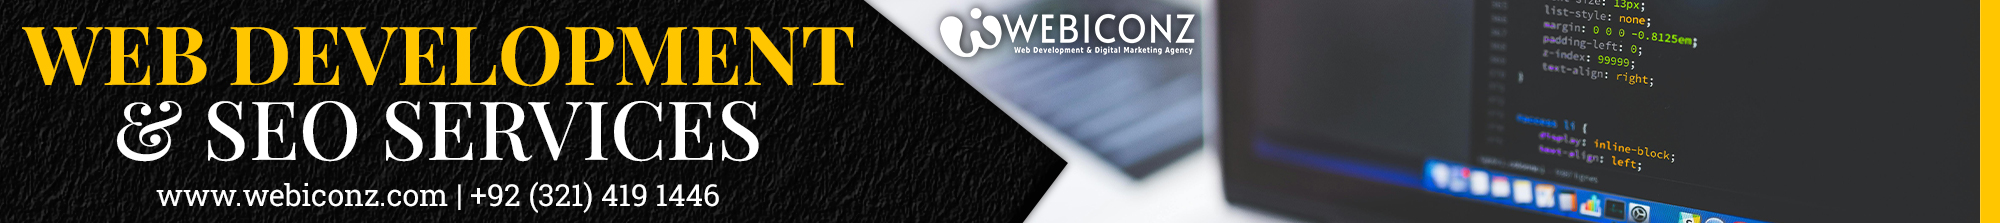 website development services in Italy